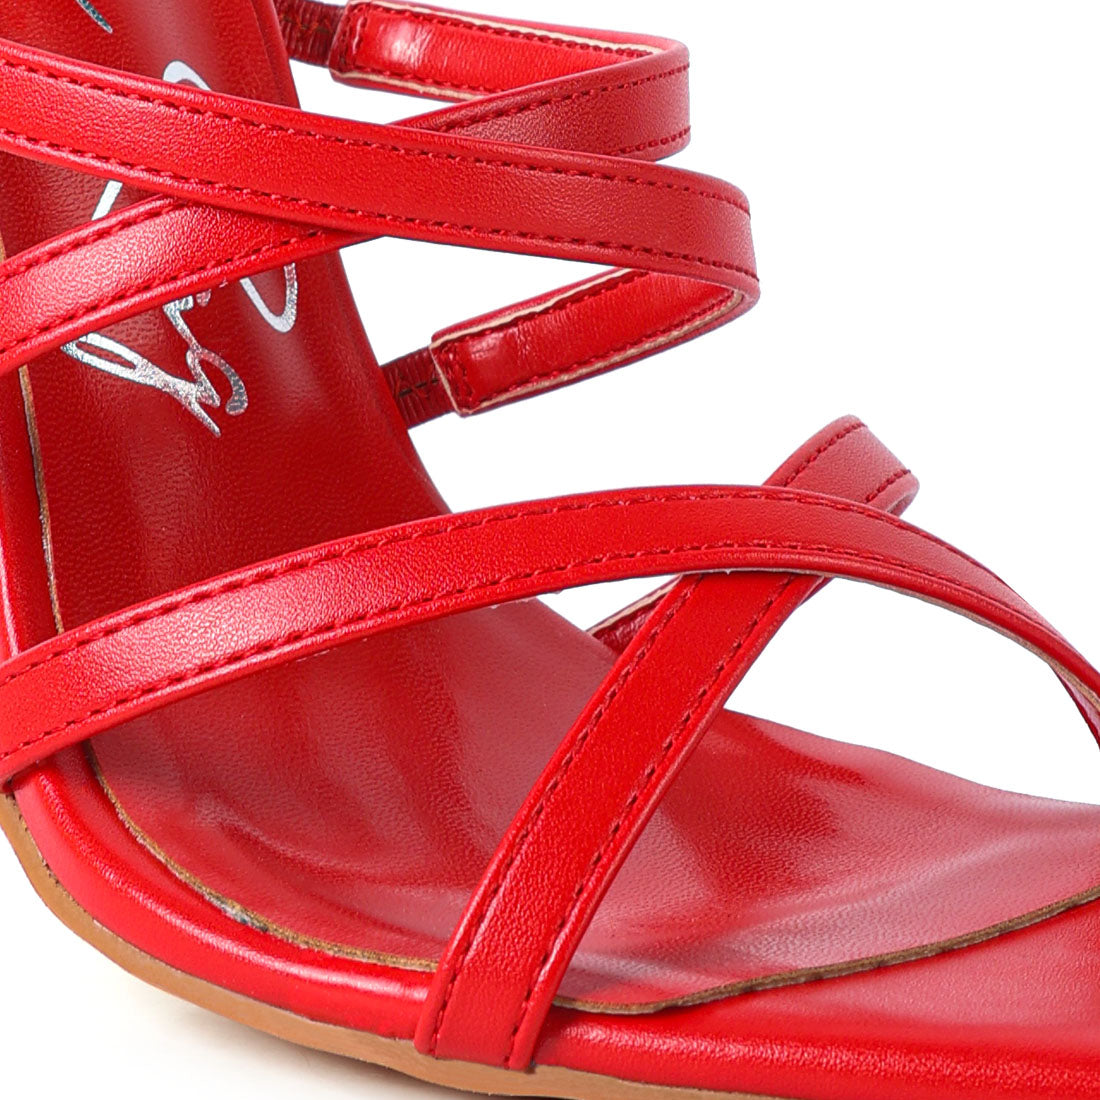 Red High Heeled Sandals